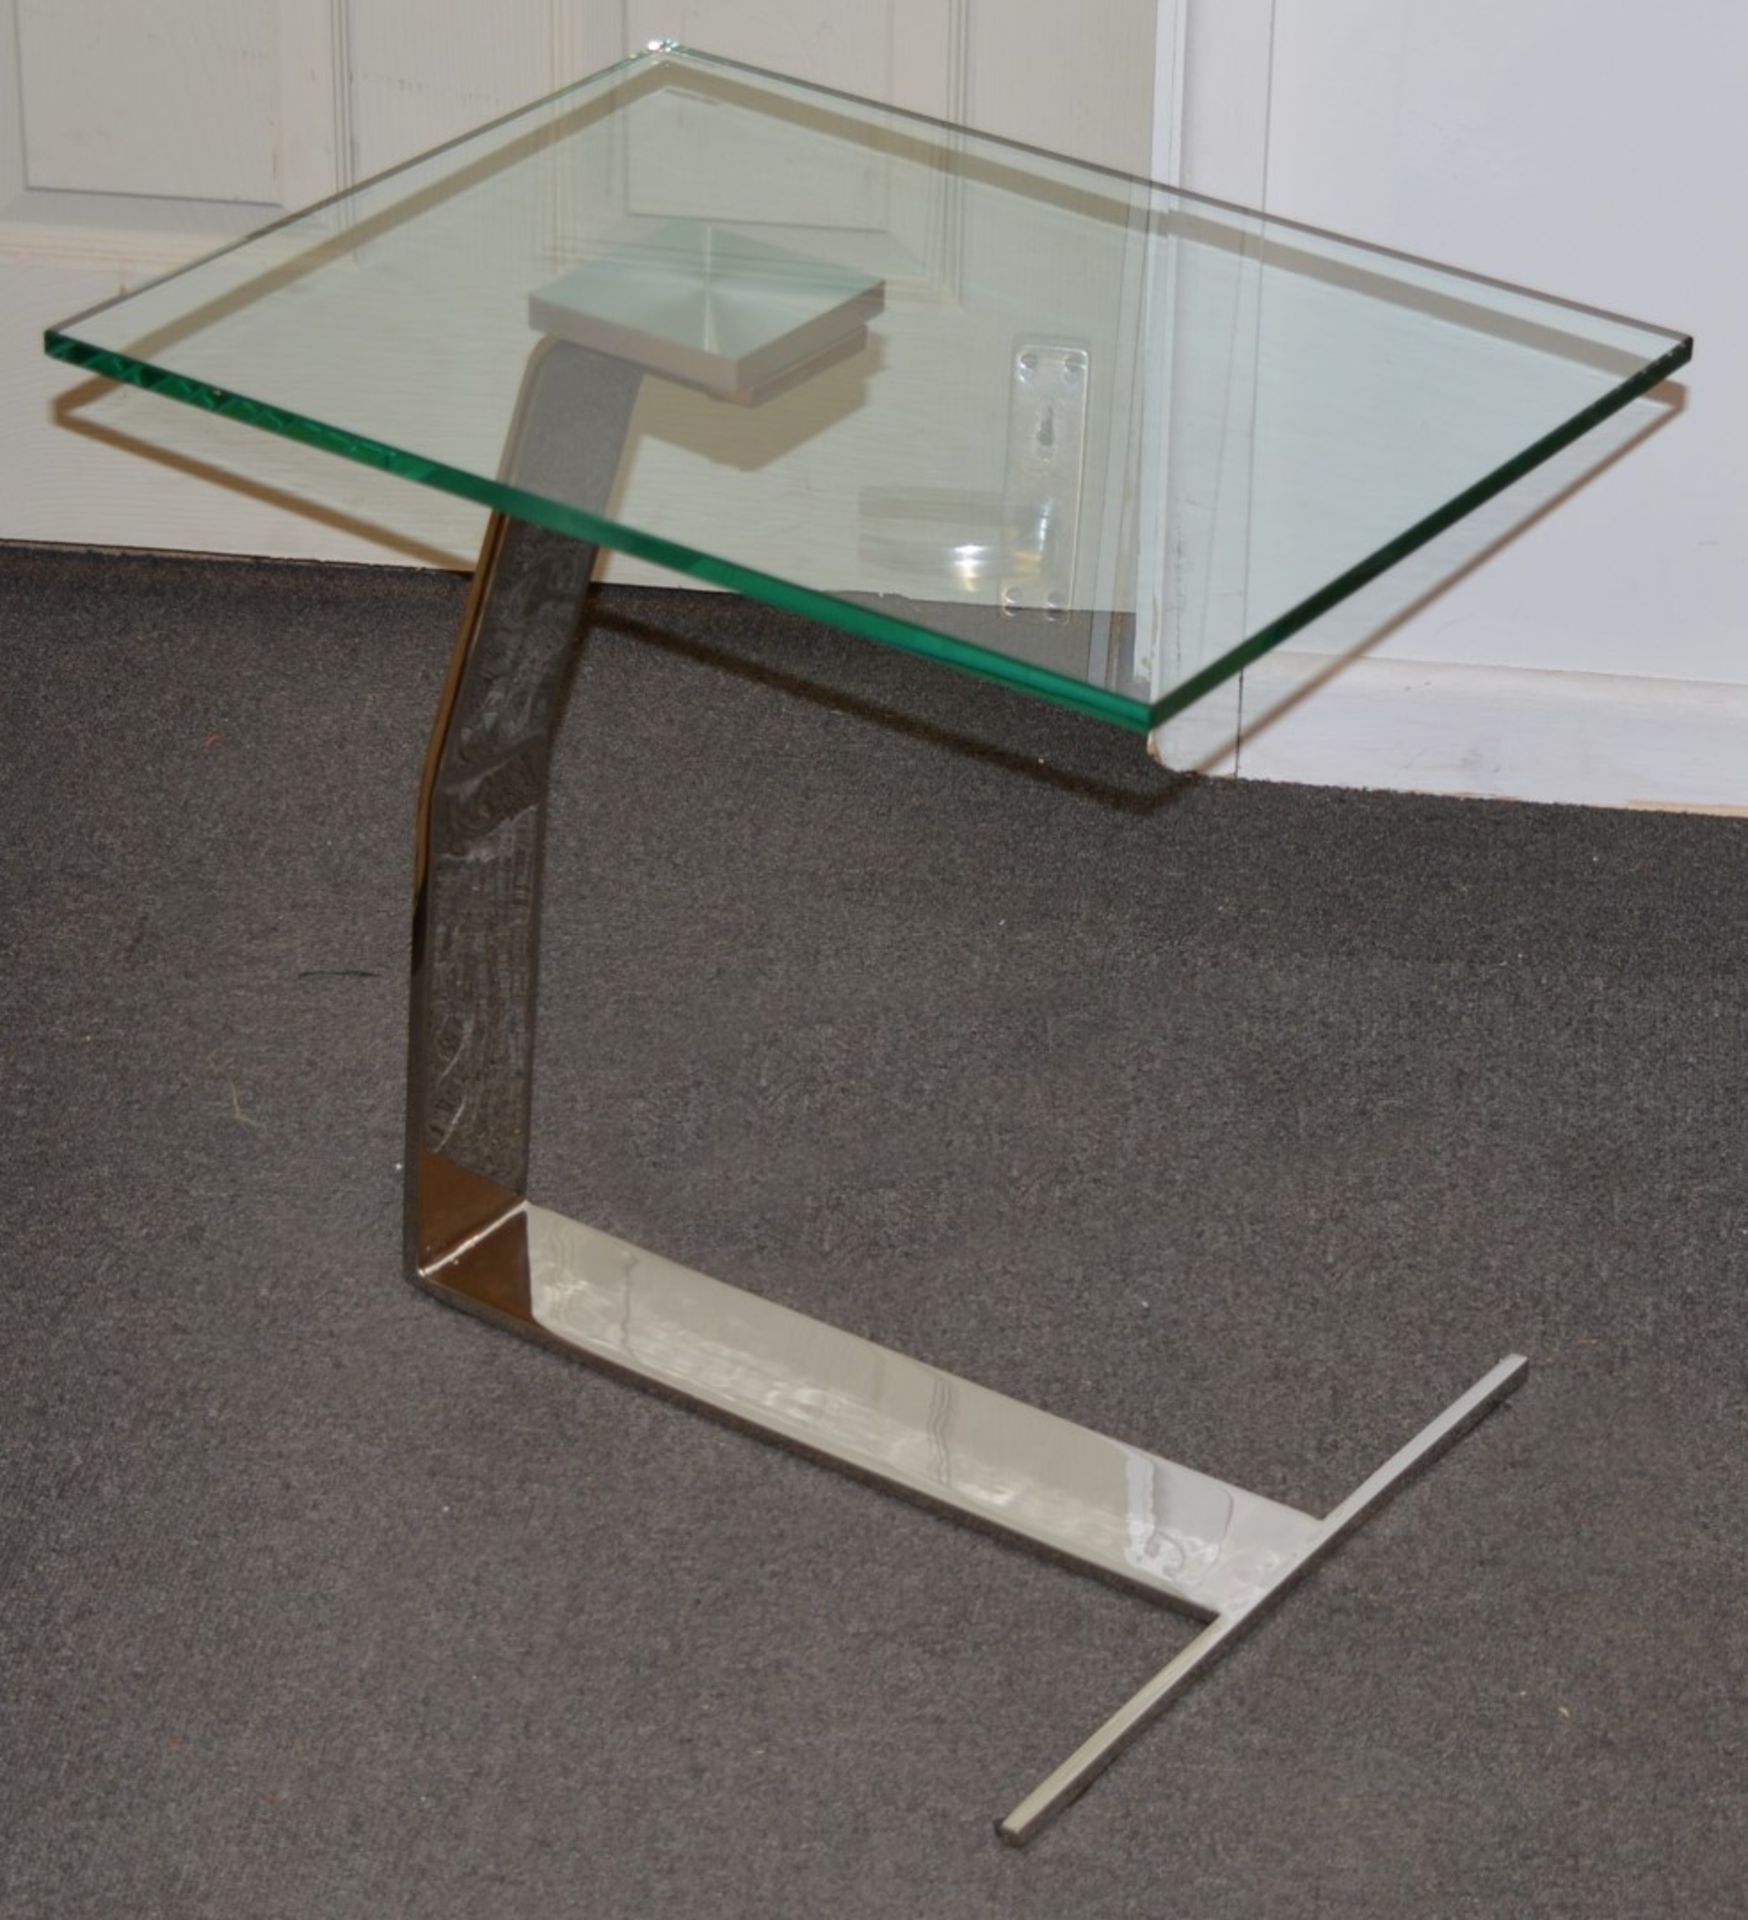 1 x Designer Chelsom Lamp Table - CL081 - Chrome Base With Clear Tempered Glass Top - Stunning